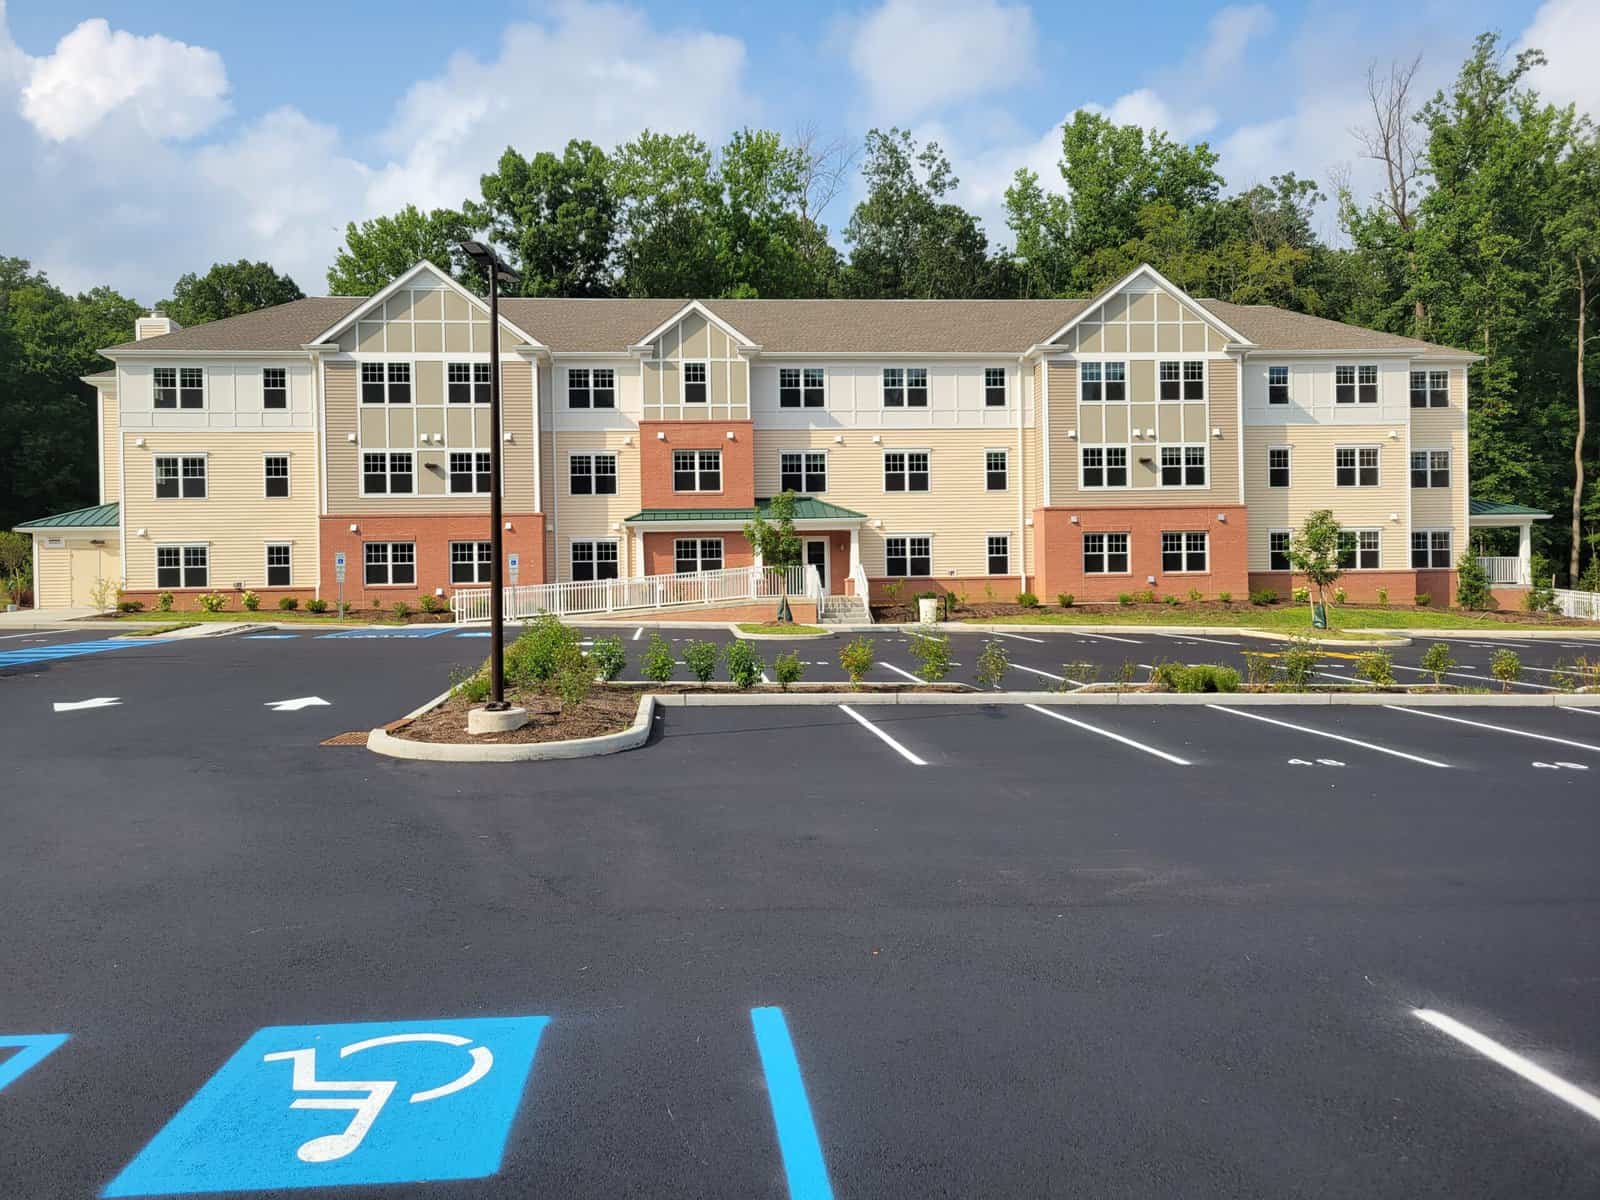 Dedication of new apartment building at Princeton Community Housing set for Oct. 28